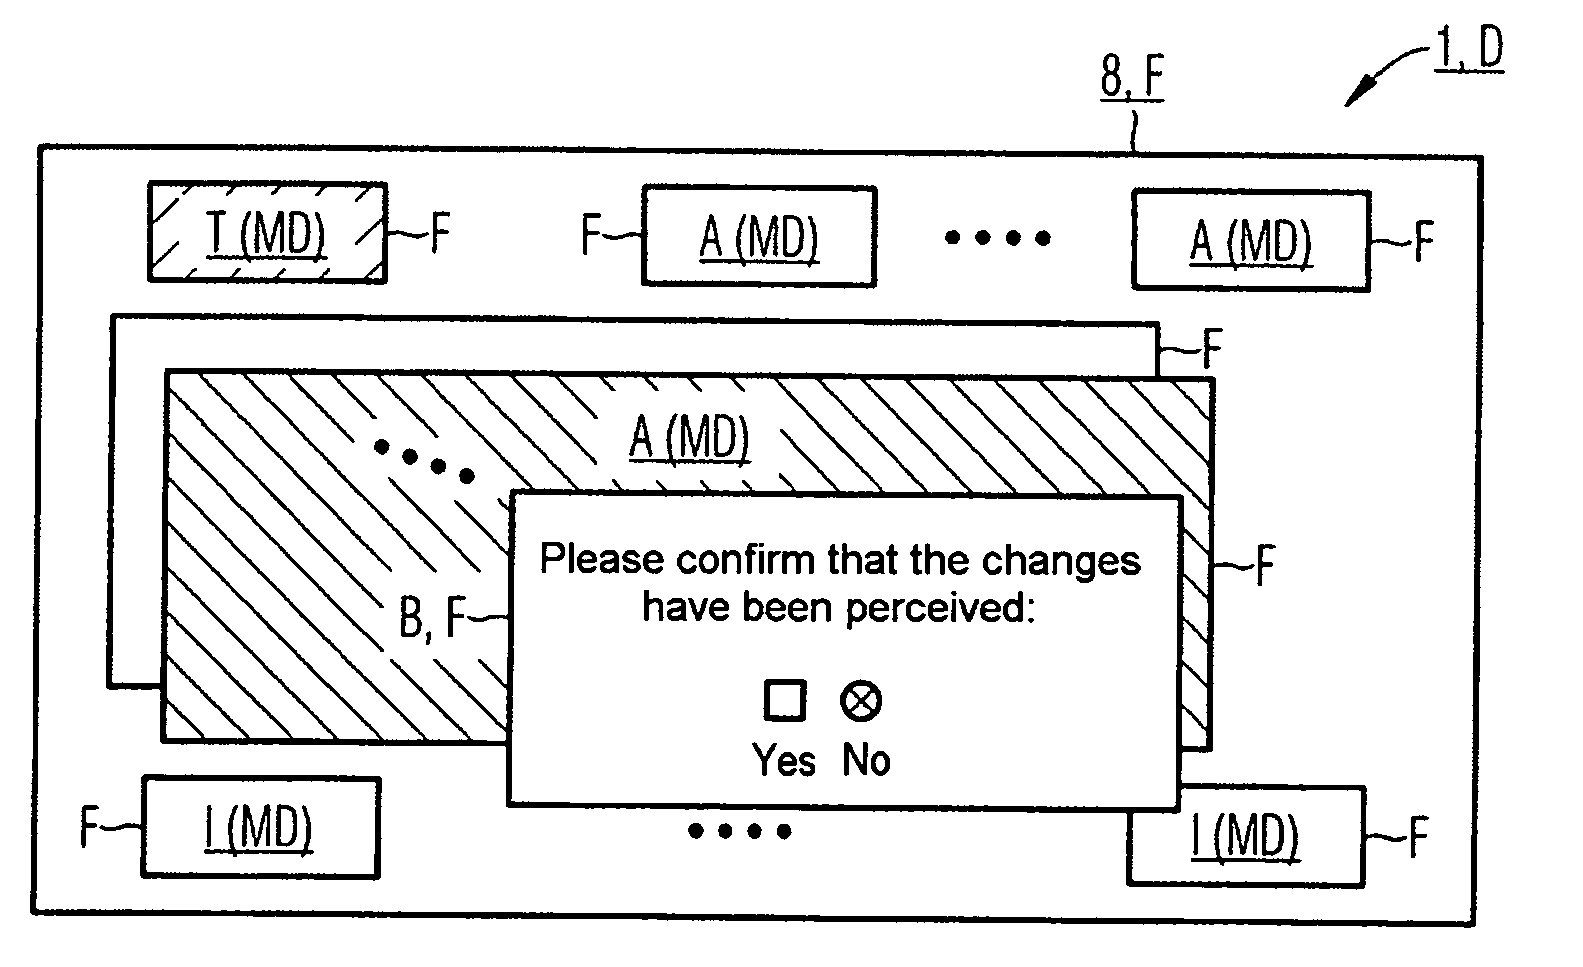 Method and apparatus for processing and outputting a version change for a data record which includes medical therapeutic advice items